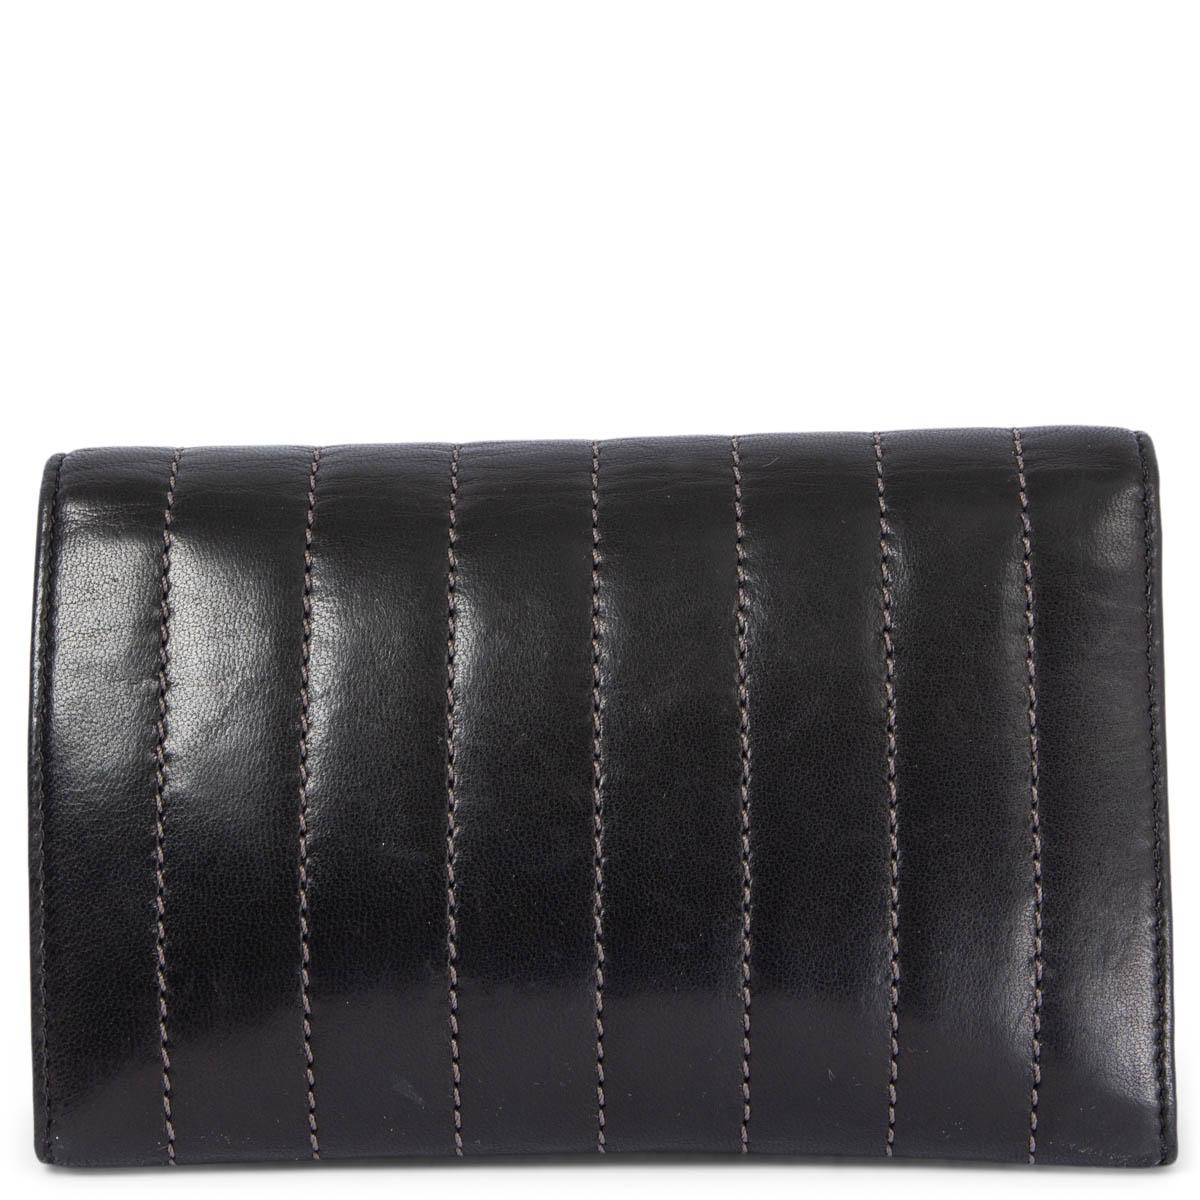 Women's CHANEL black quilted leather Wallet